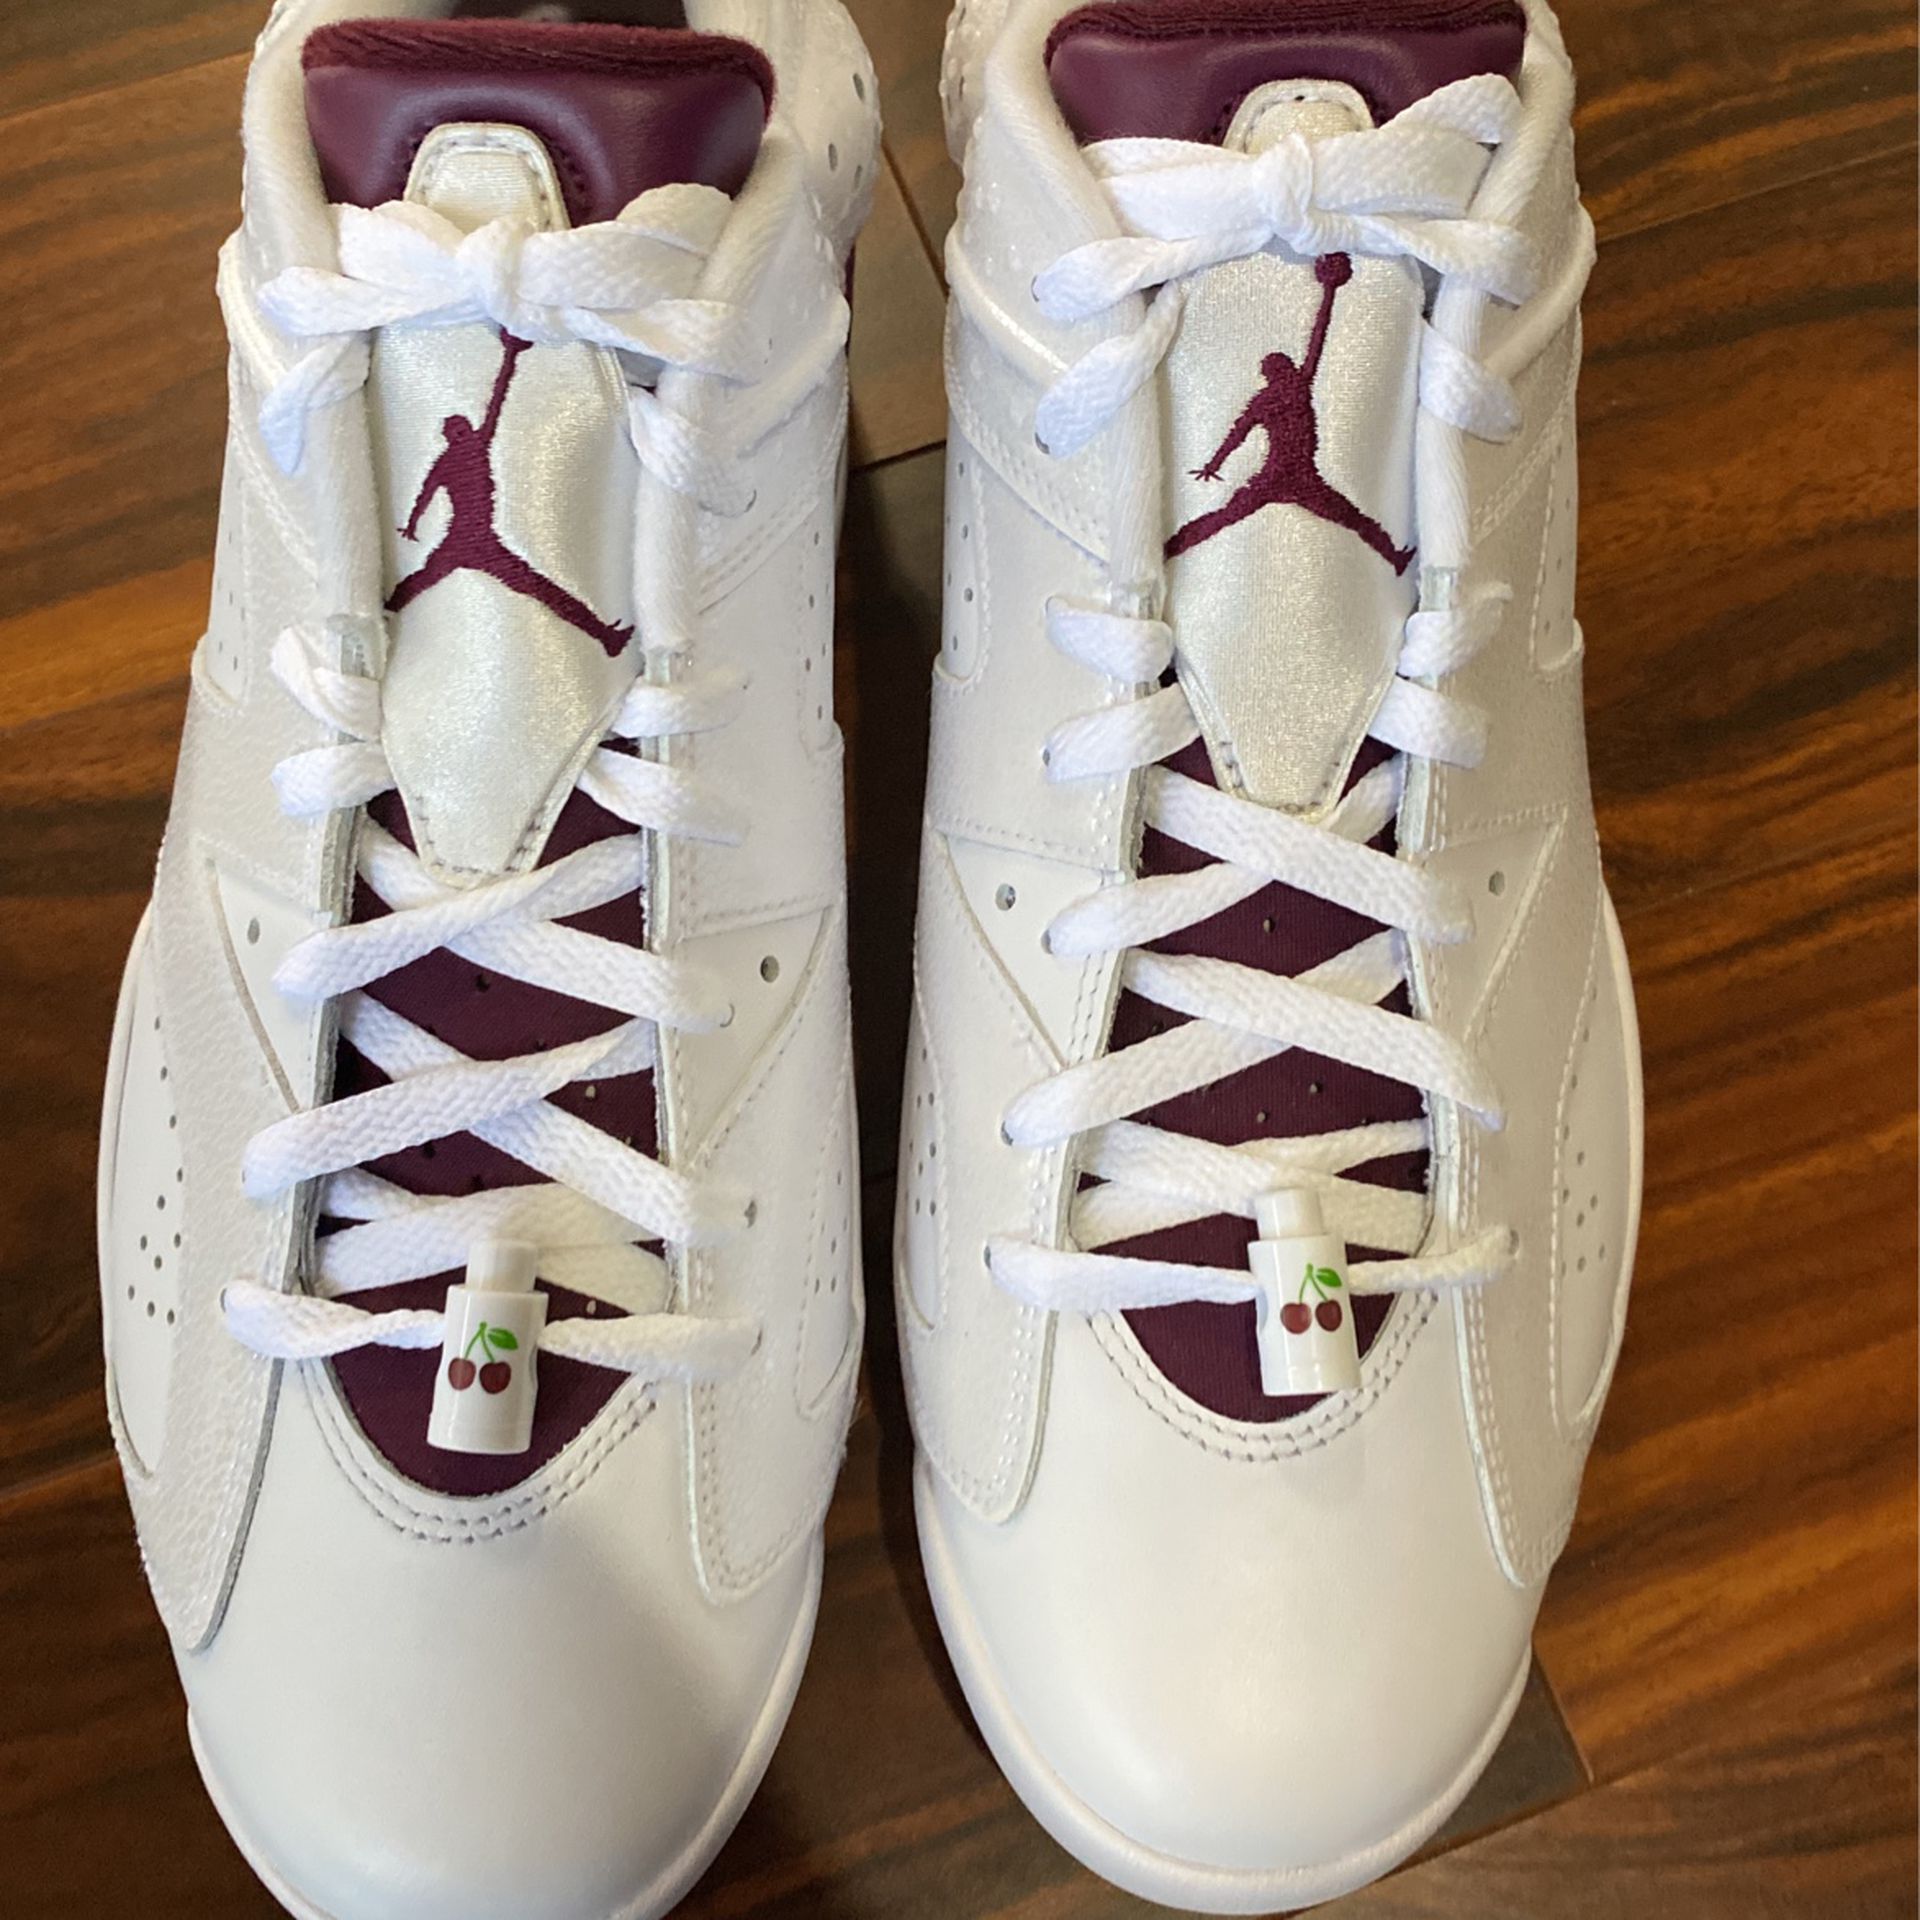 Jordan Retro 6 G NRG M23 for Sale in Tigard, OR - OfferUp